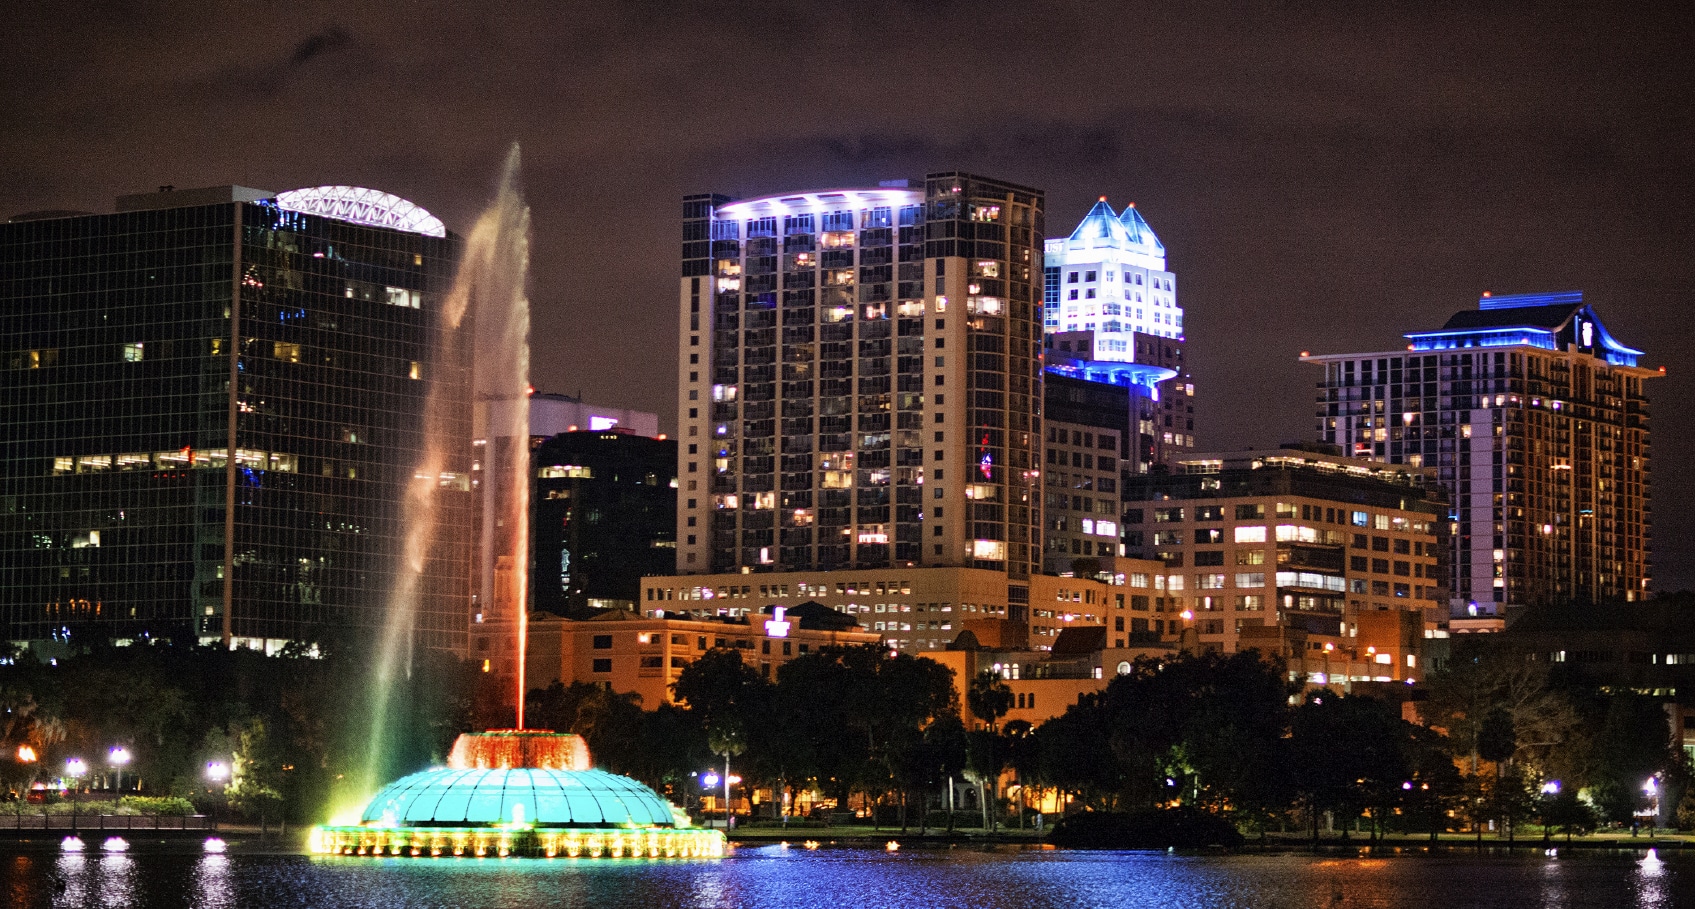 20 Most Interesting Facts About Orlando